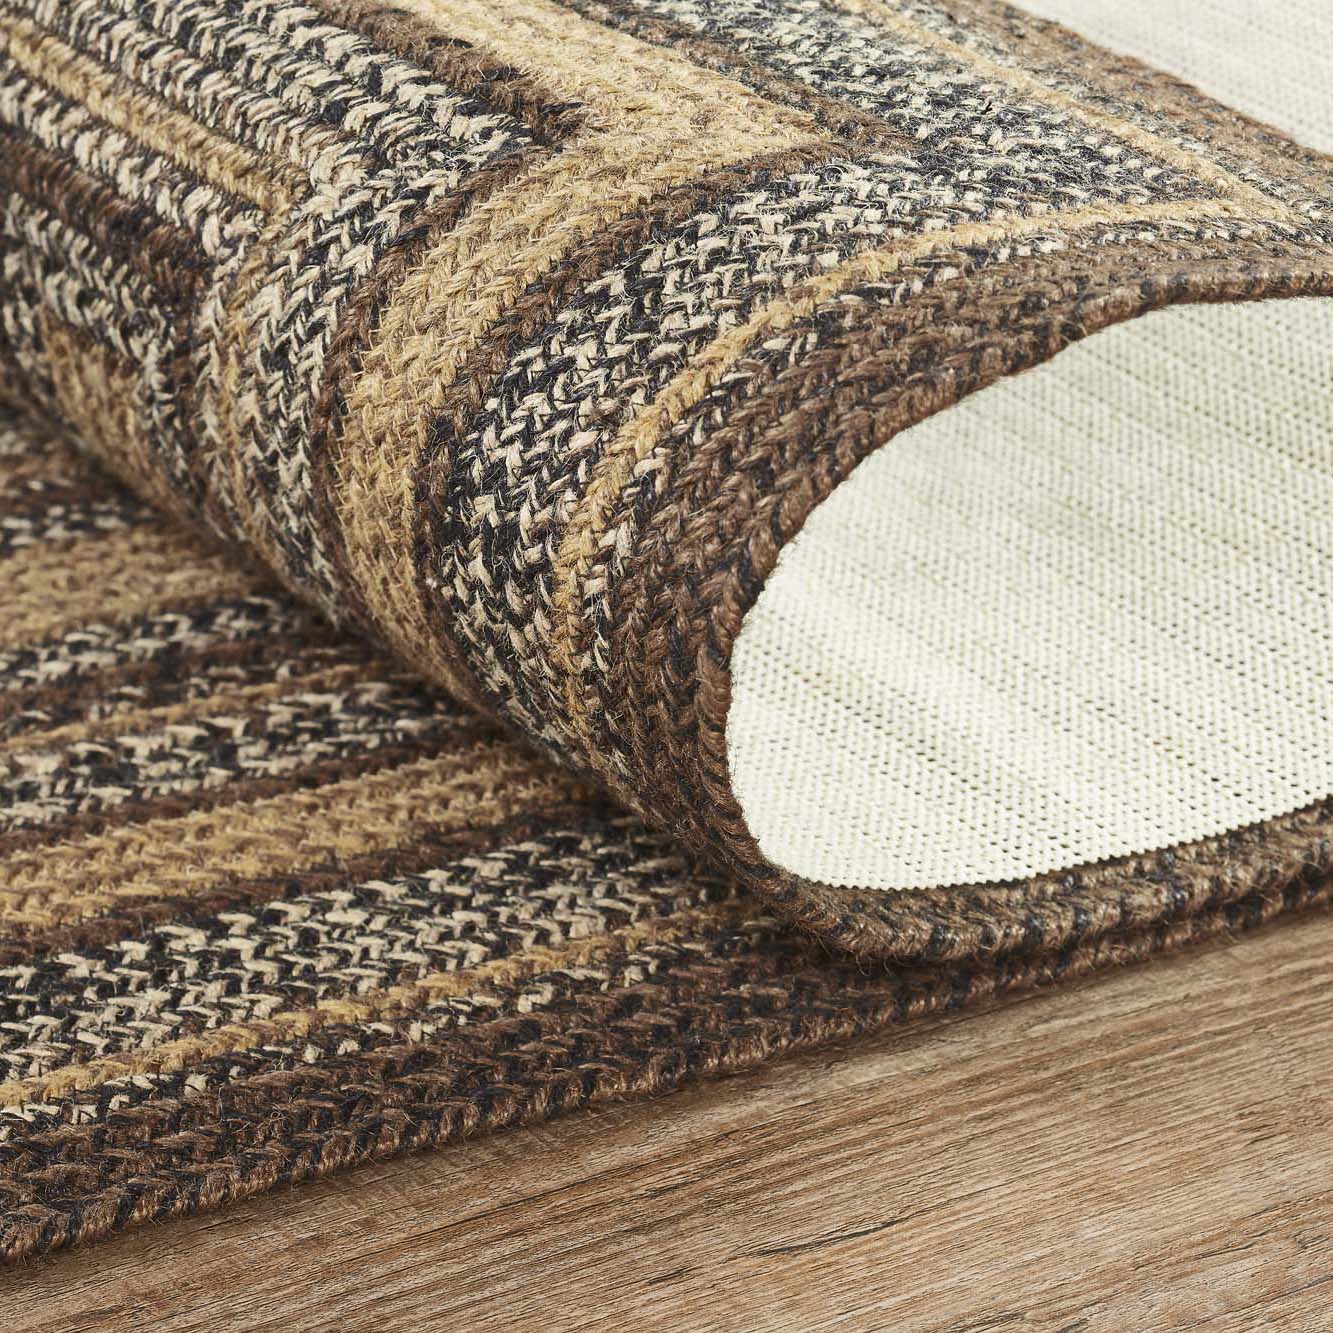 Espresso Jute Braided Rug/Runner Rect with Rug Pad 22"x72" VHC Brands